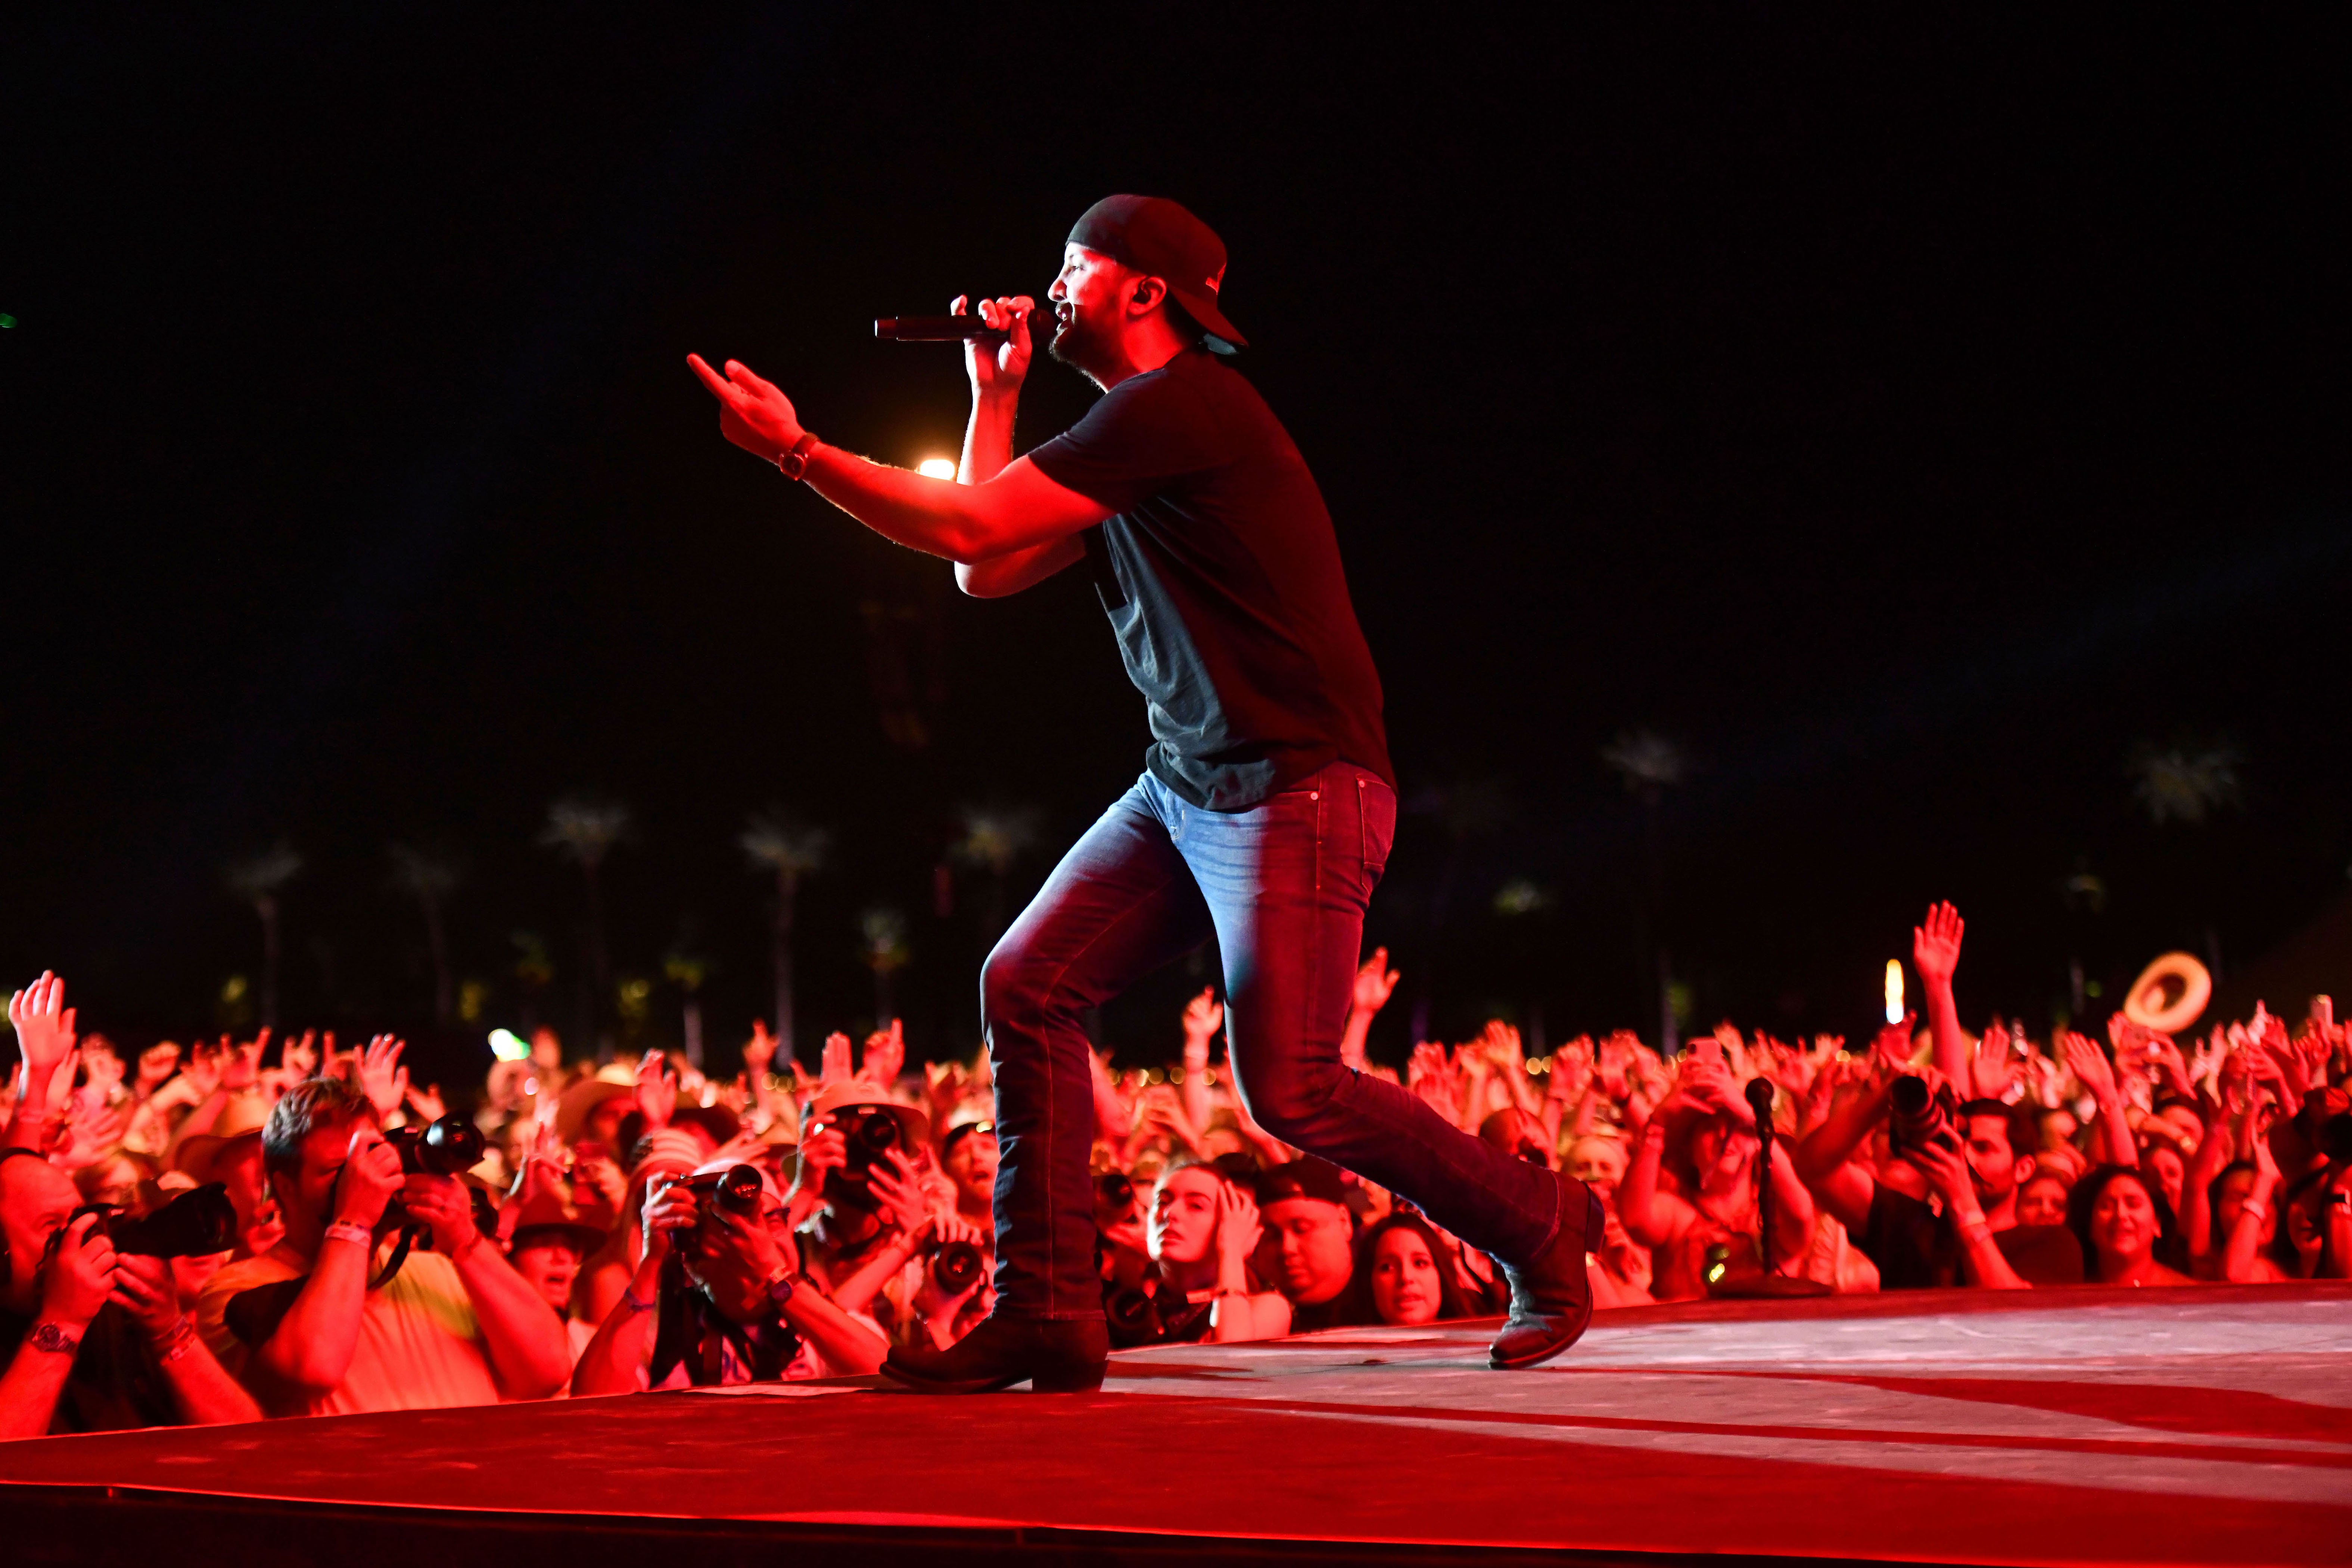 Singer Luke Bryan performs during Day 1 of the 2019 Stagecoach Country Music Festival